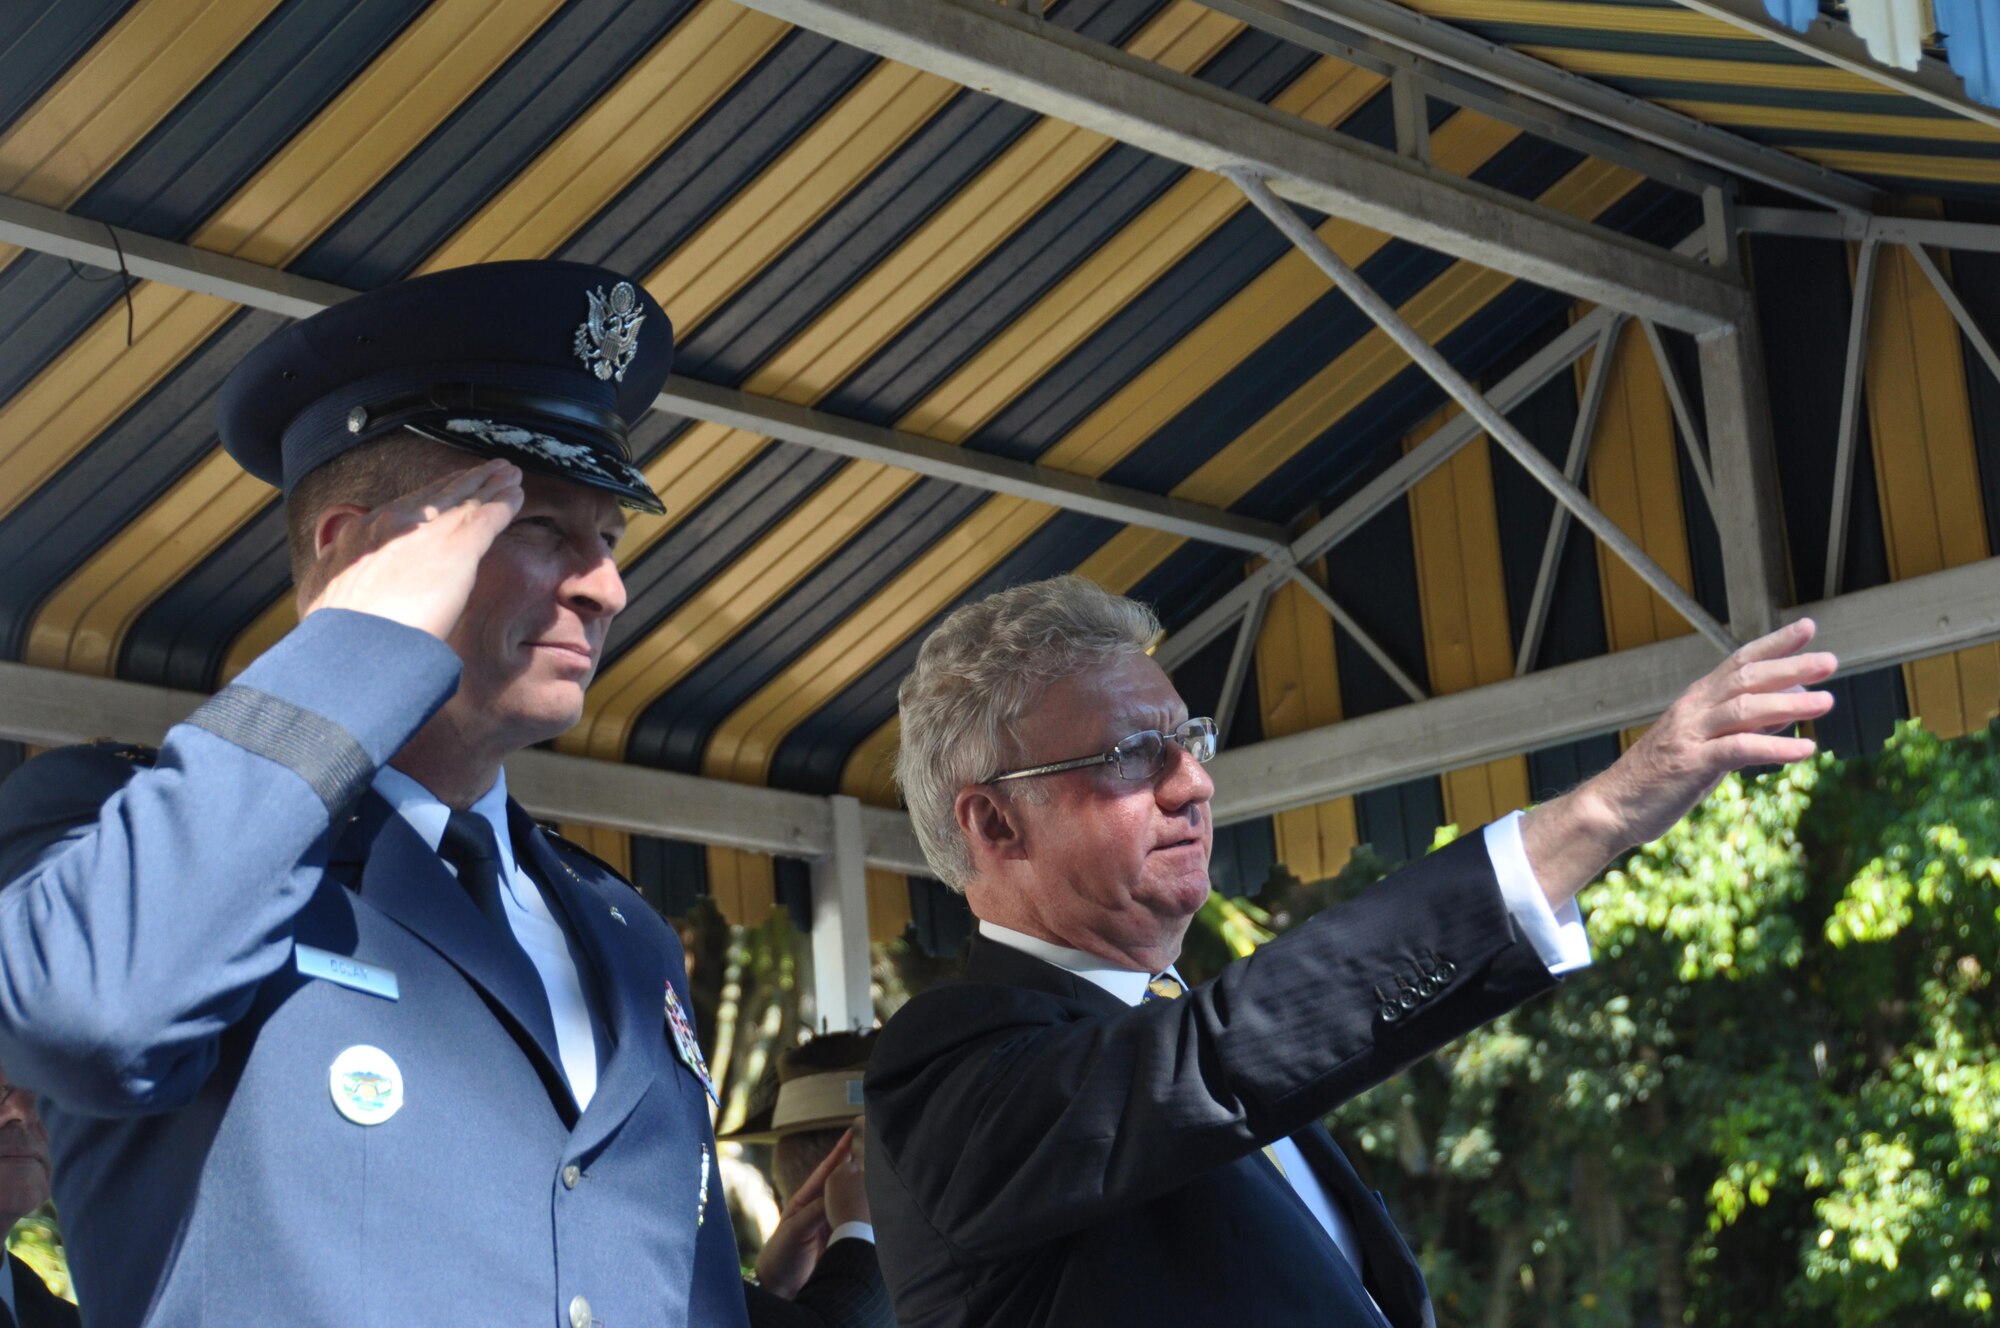 Lt. Gen. John Dolan, Commander, 5th Air Force, salutes as His Excellency the Honorable Paul de Jersey AC, Administrator of the Government of the Commonwealth of Australia, waves during a VP70 Parade, Aug. 15, 2015. The parade in honor veterans of World War II was part of several commemoration events marking the 70th anniversary of the end of WWII hosted by Townsville, Australia. (U.S. Air Force photo by Capt. George M. Tobias/Released)